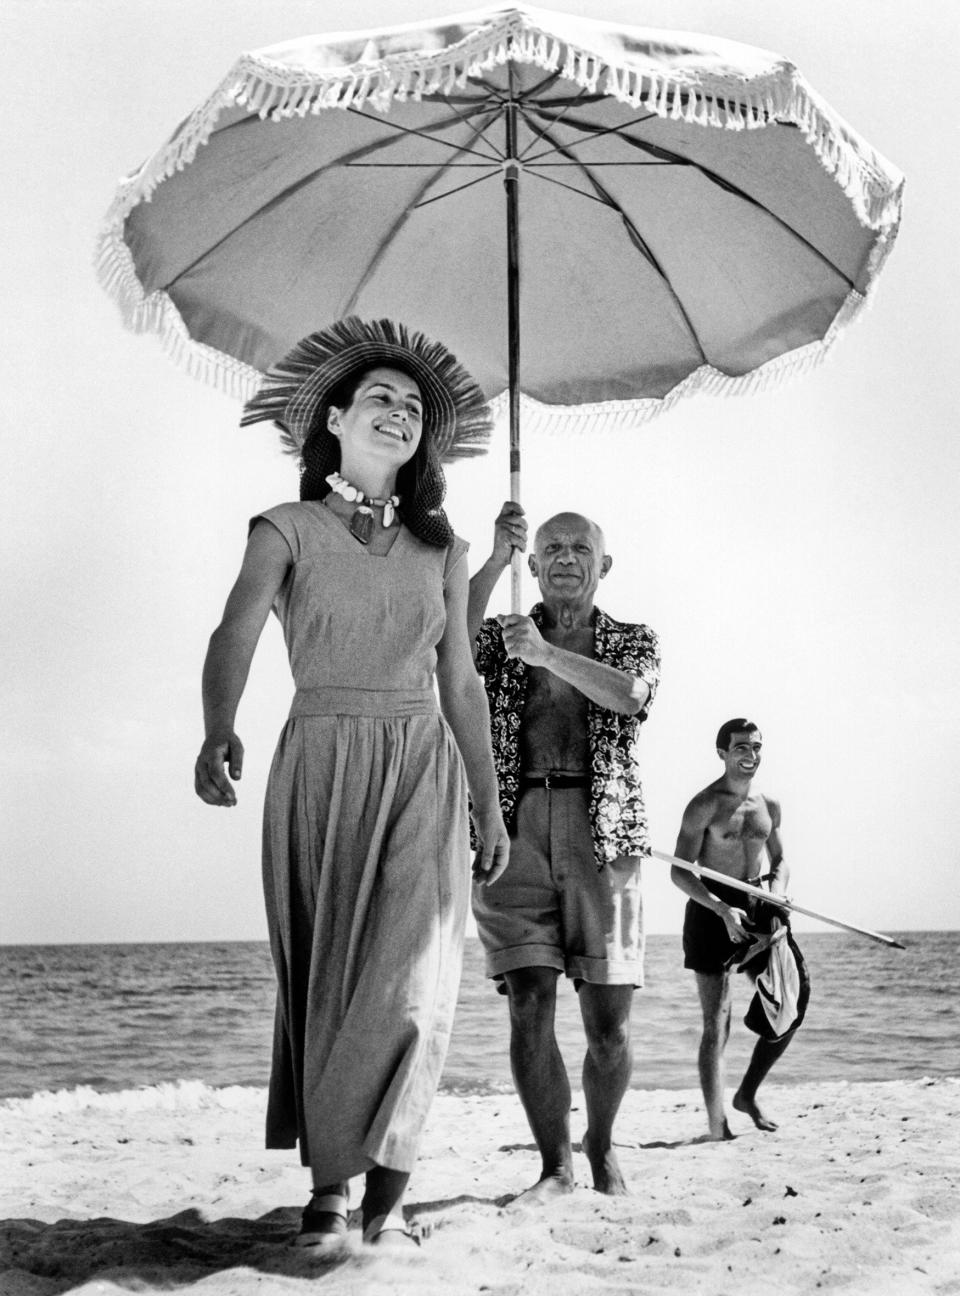 Françoise Gilot and Picasso in 1948 - Robert Capa/Magnum Photos/Avalon